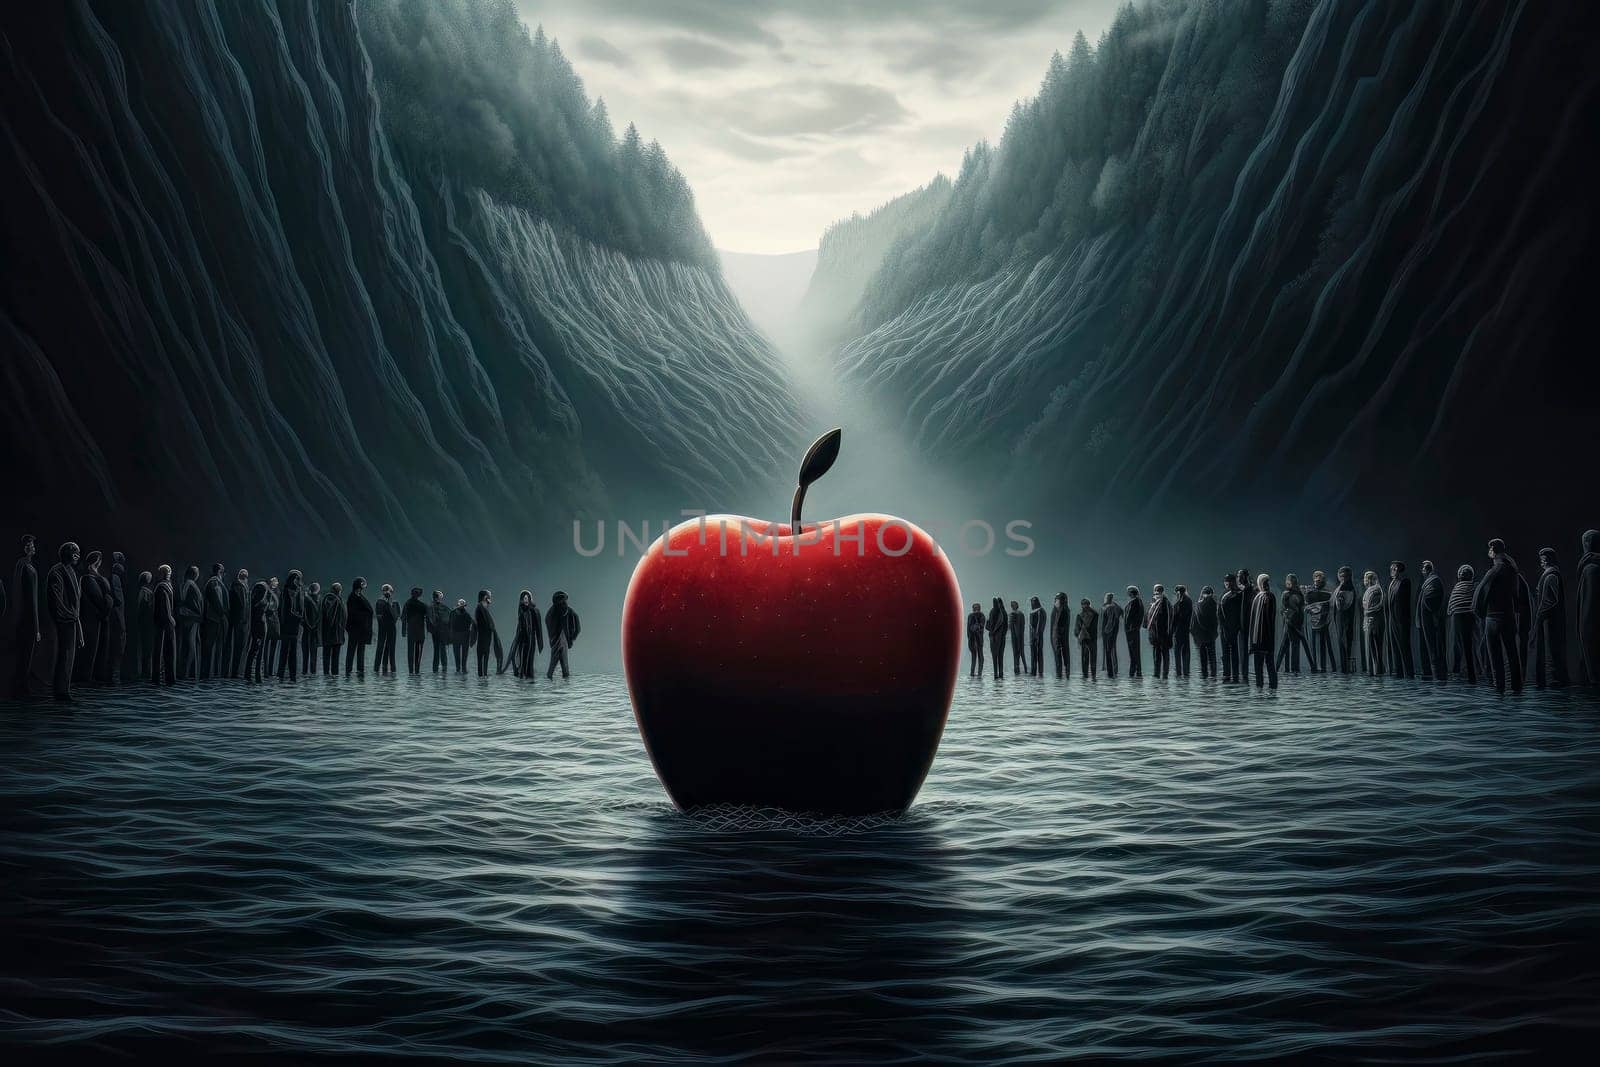 A surreal image featuring a red apple amidst a river of people, symbolizing the concept of original sin.